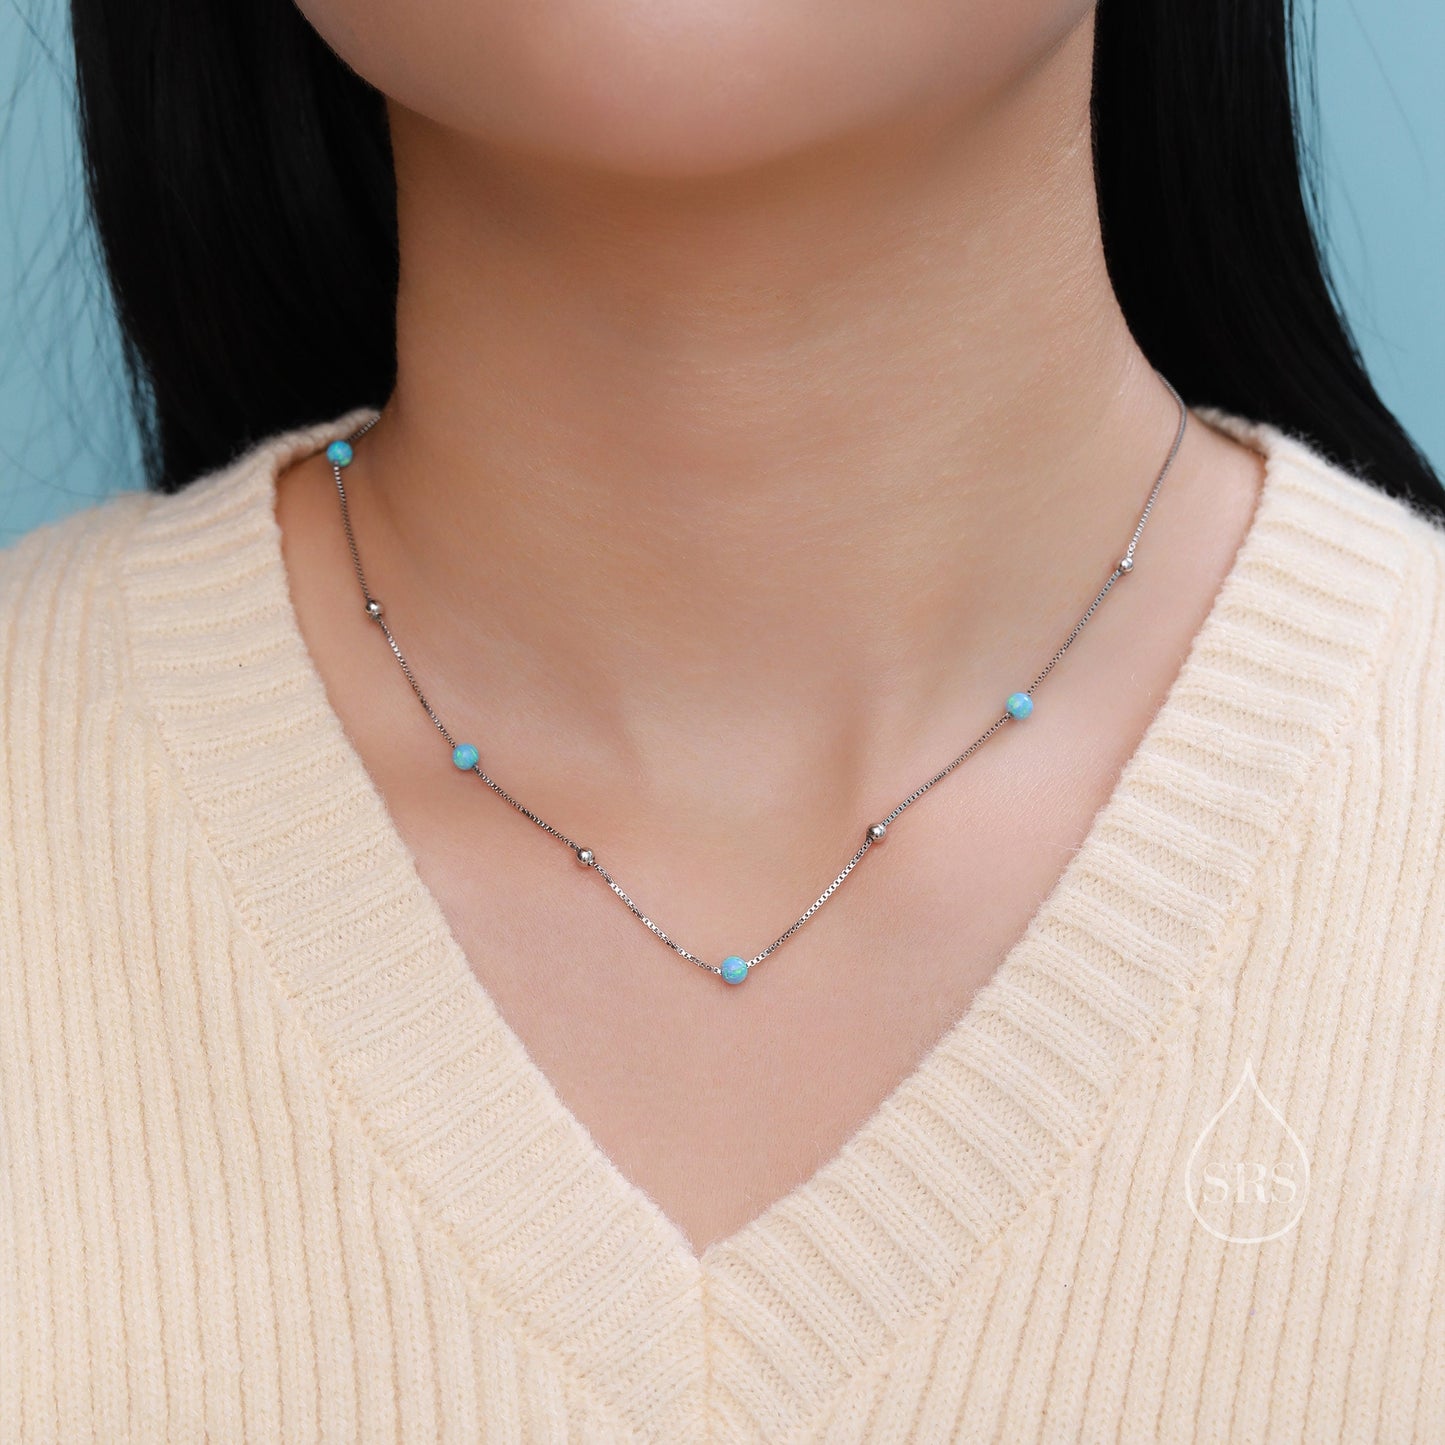 Opal Bead Motif Choker Necklace in Sterling Silver, Silver or Gold, Blue Opal or White Opal Necklace